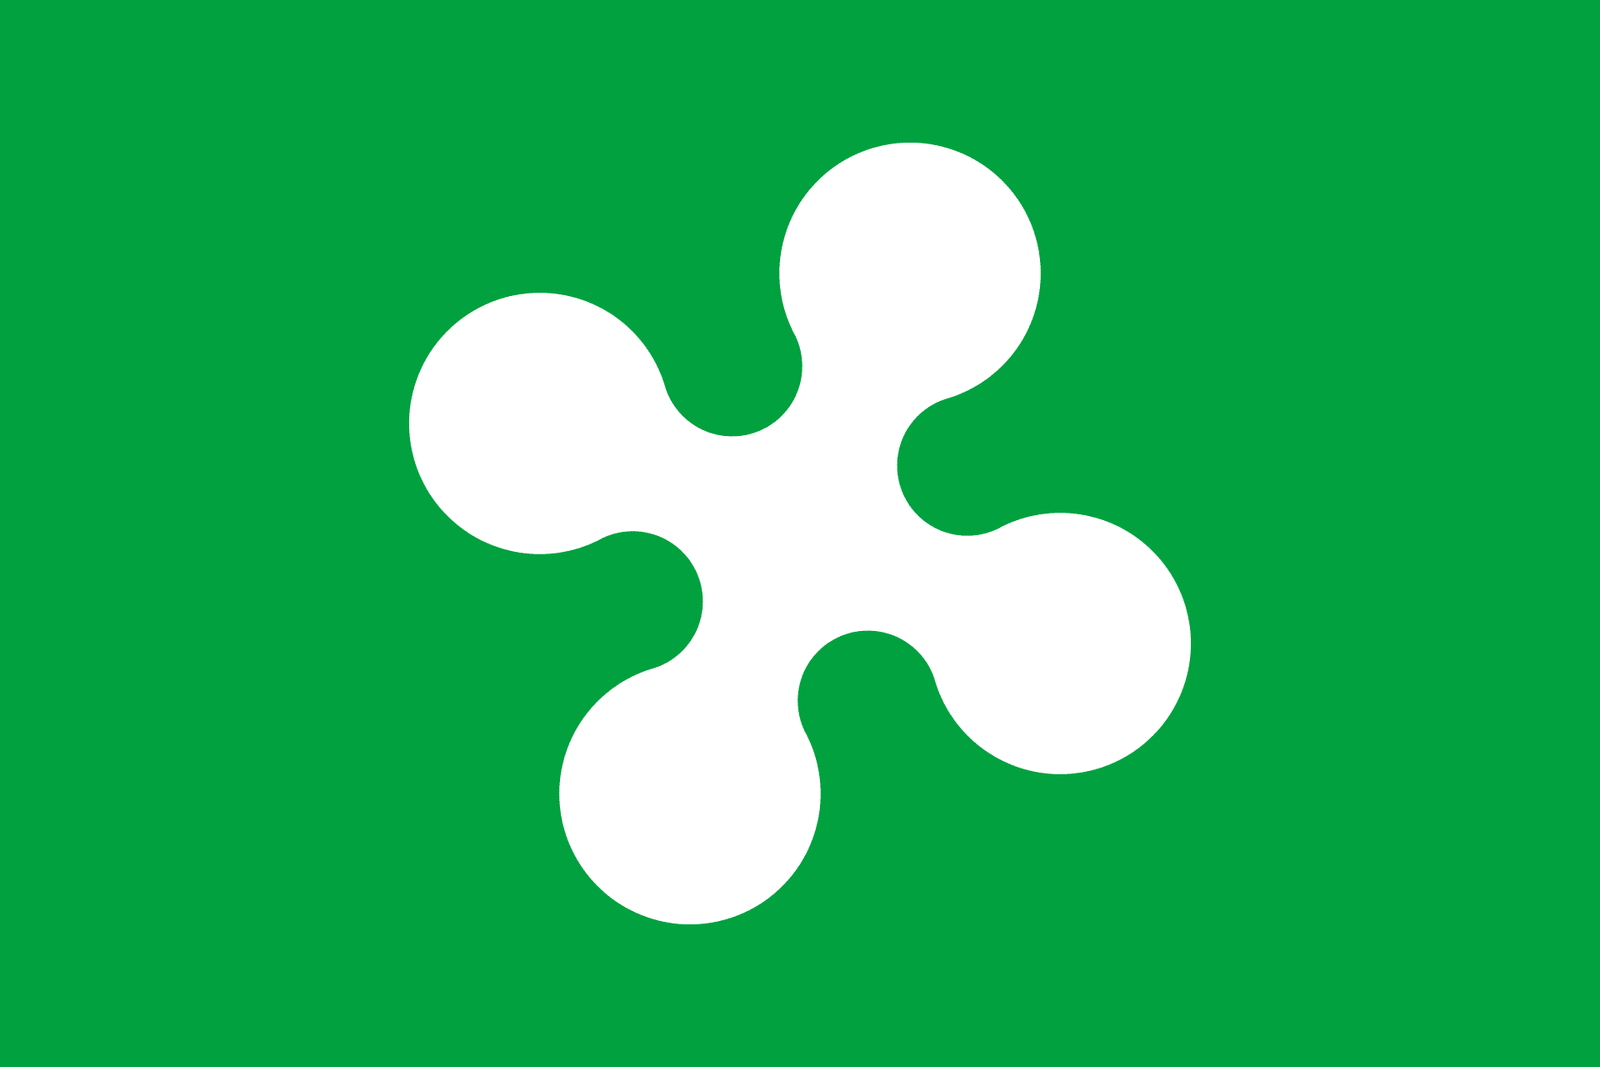 Flag of Lombardy